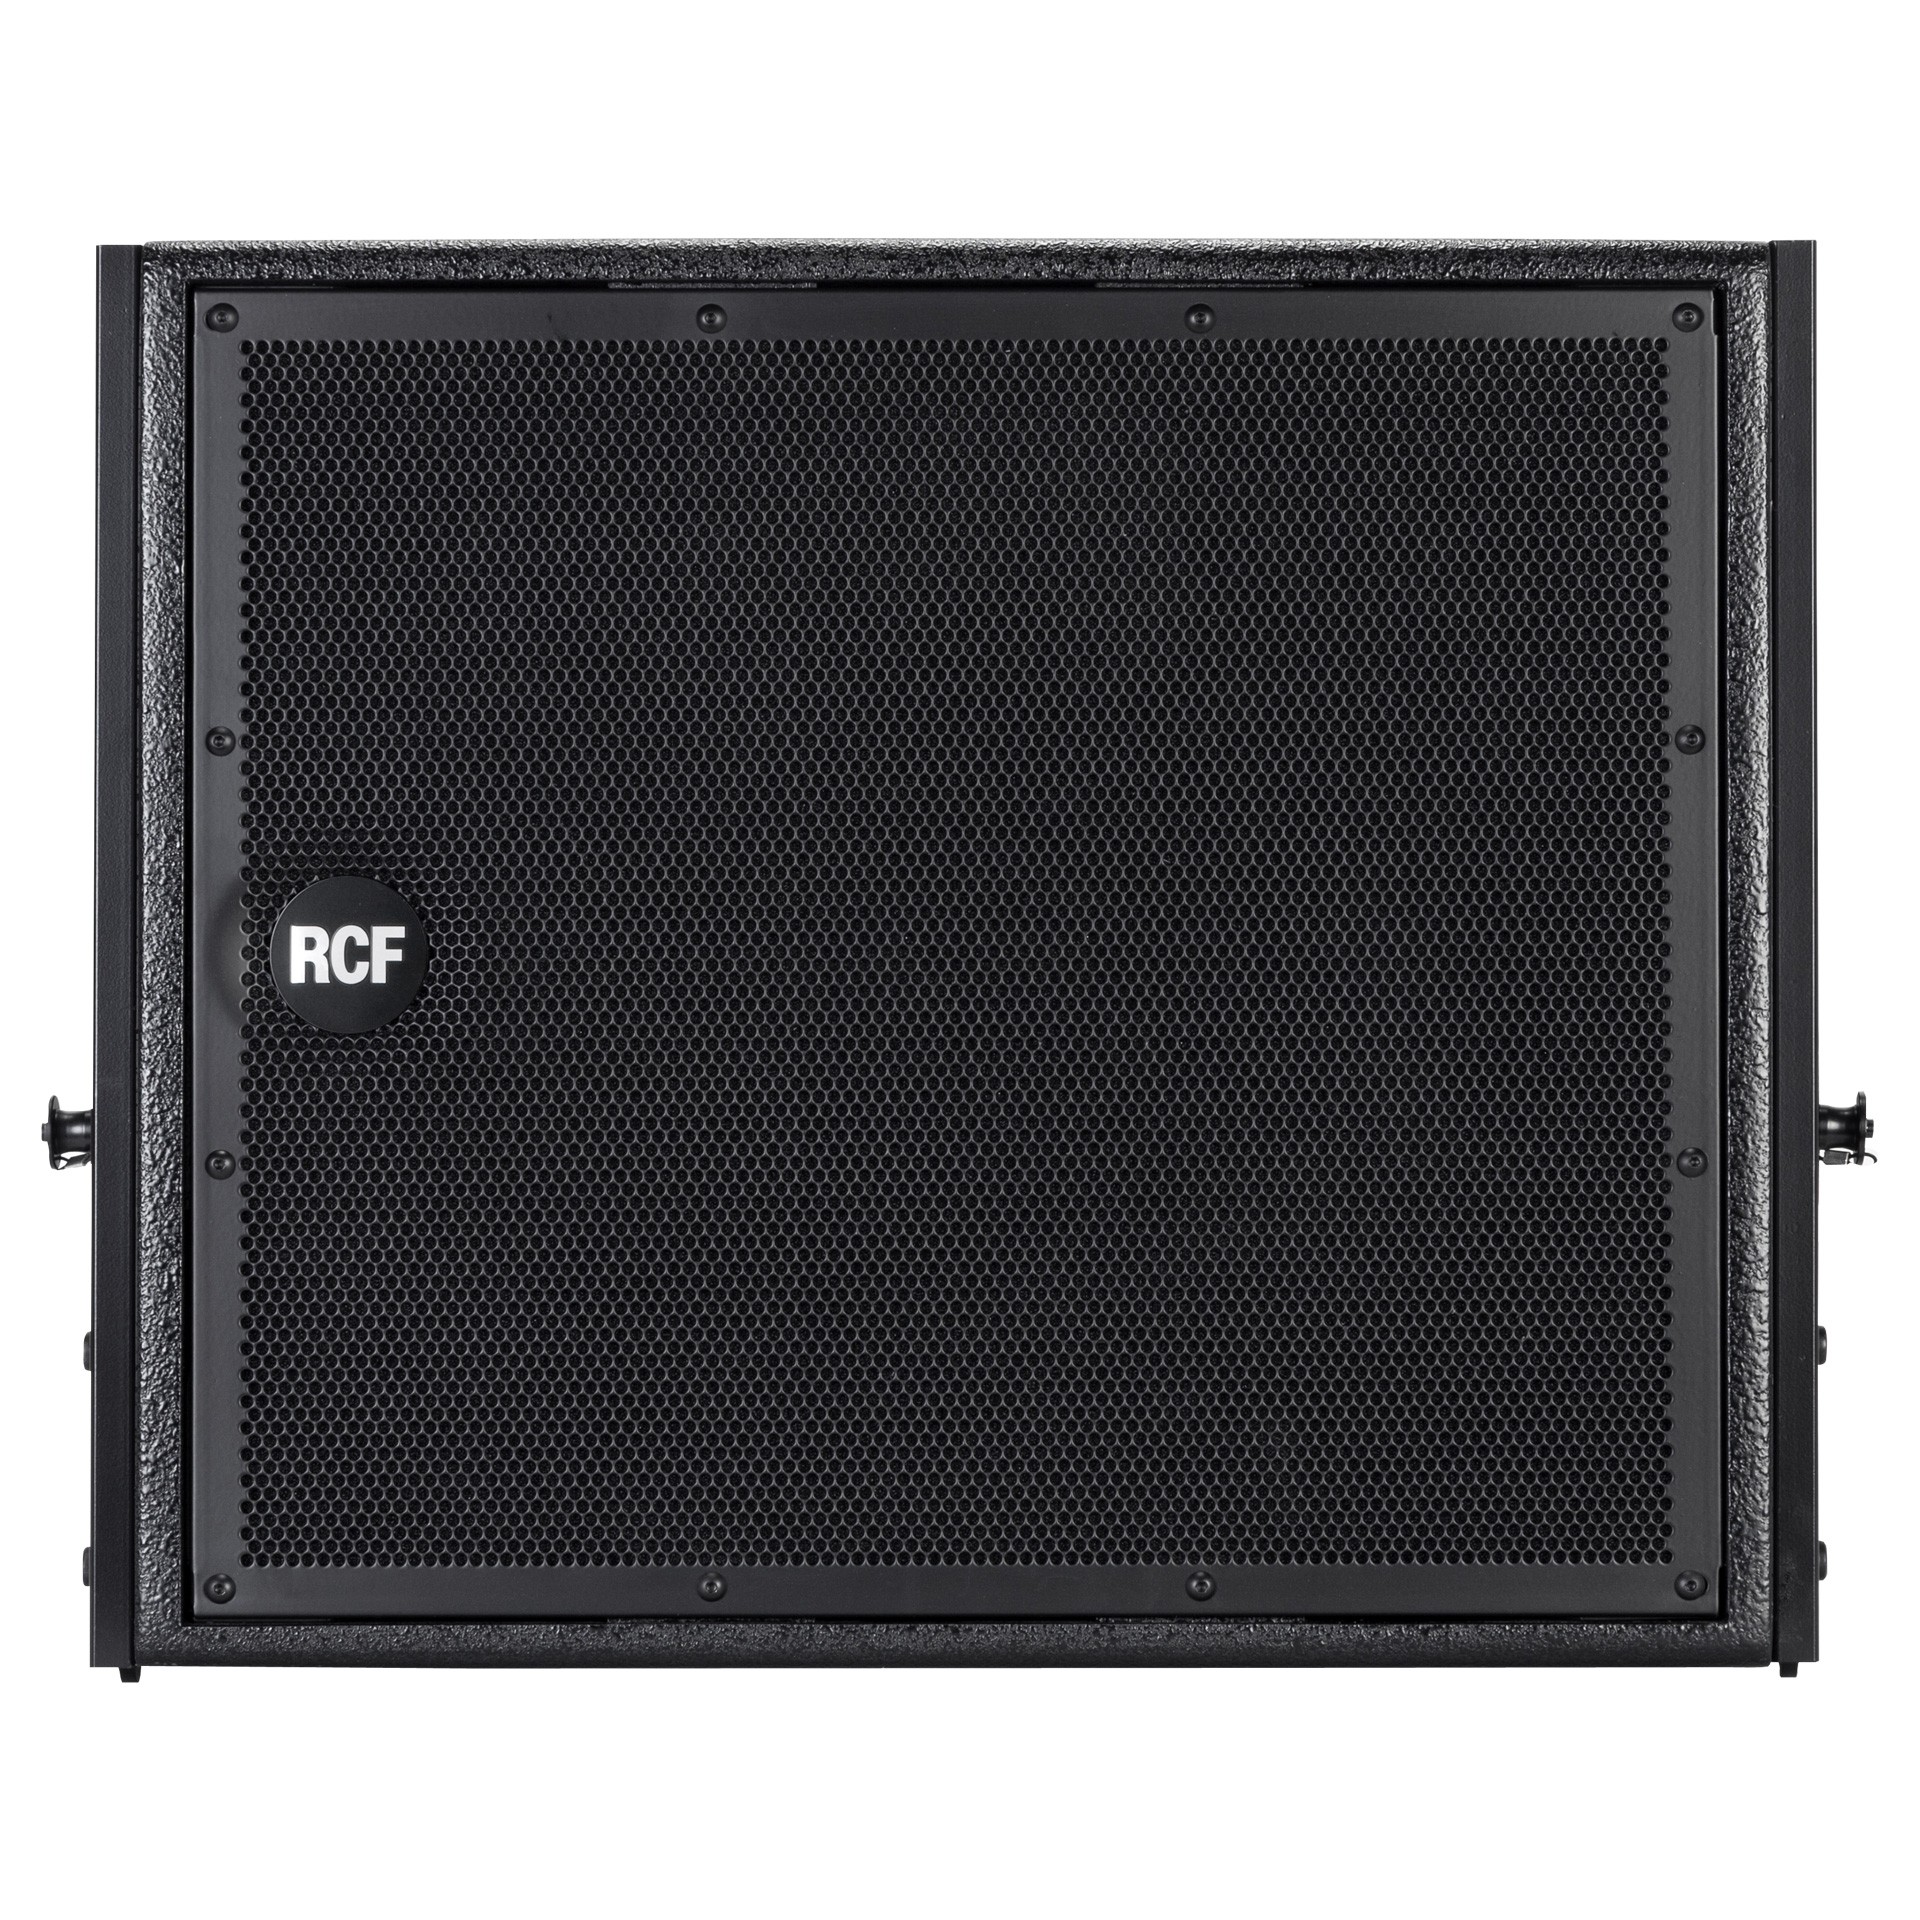 Subwoofere pro - Subwoofer activ RCF HDL 15-AS, audioclub.ro